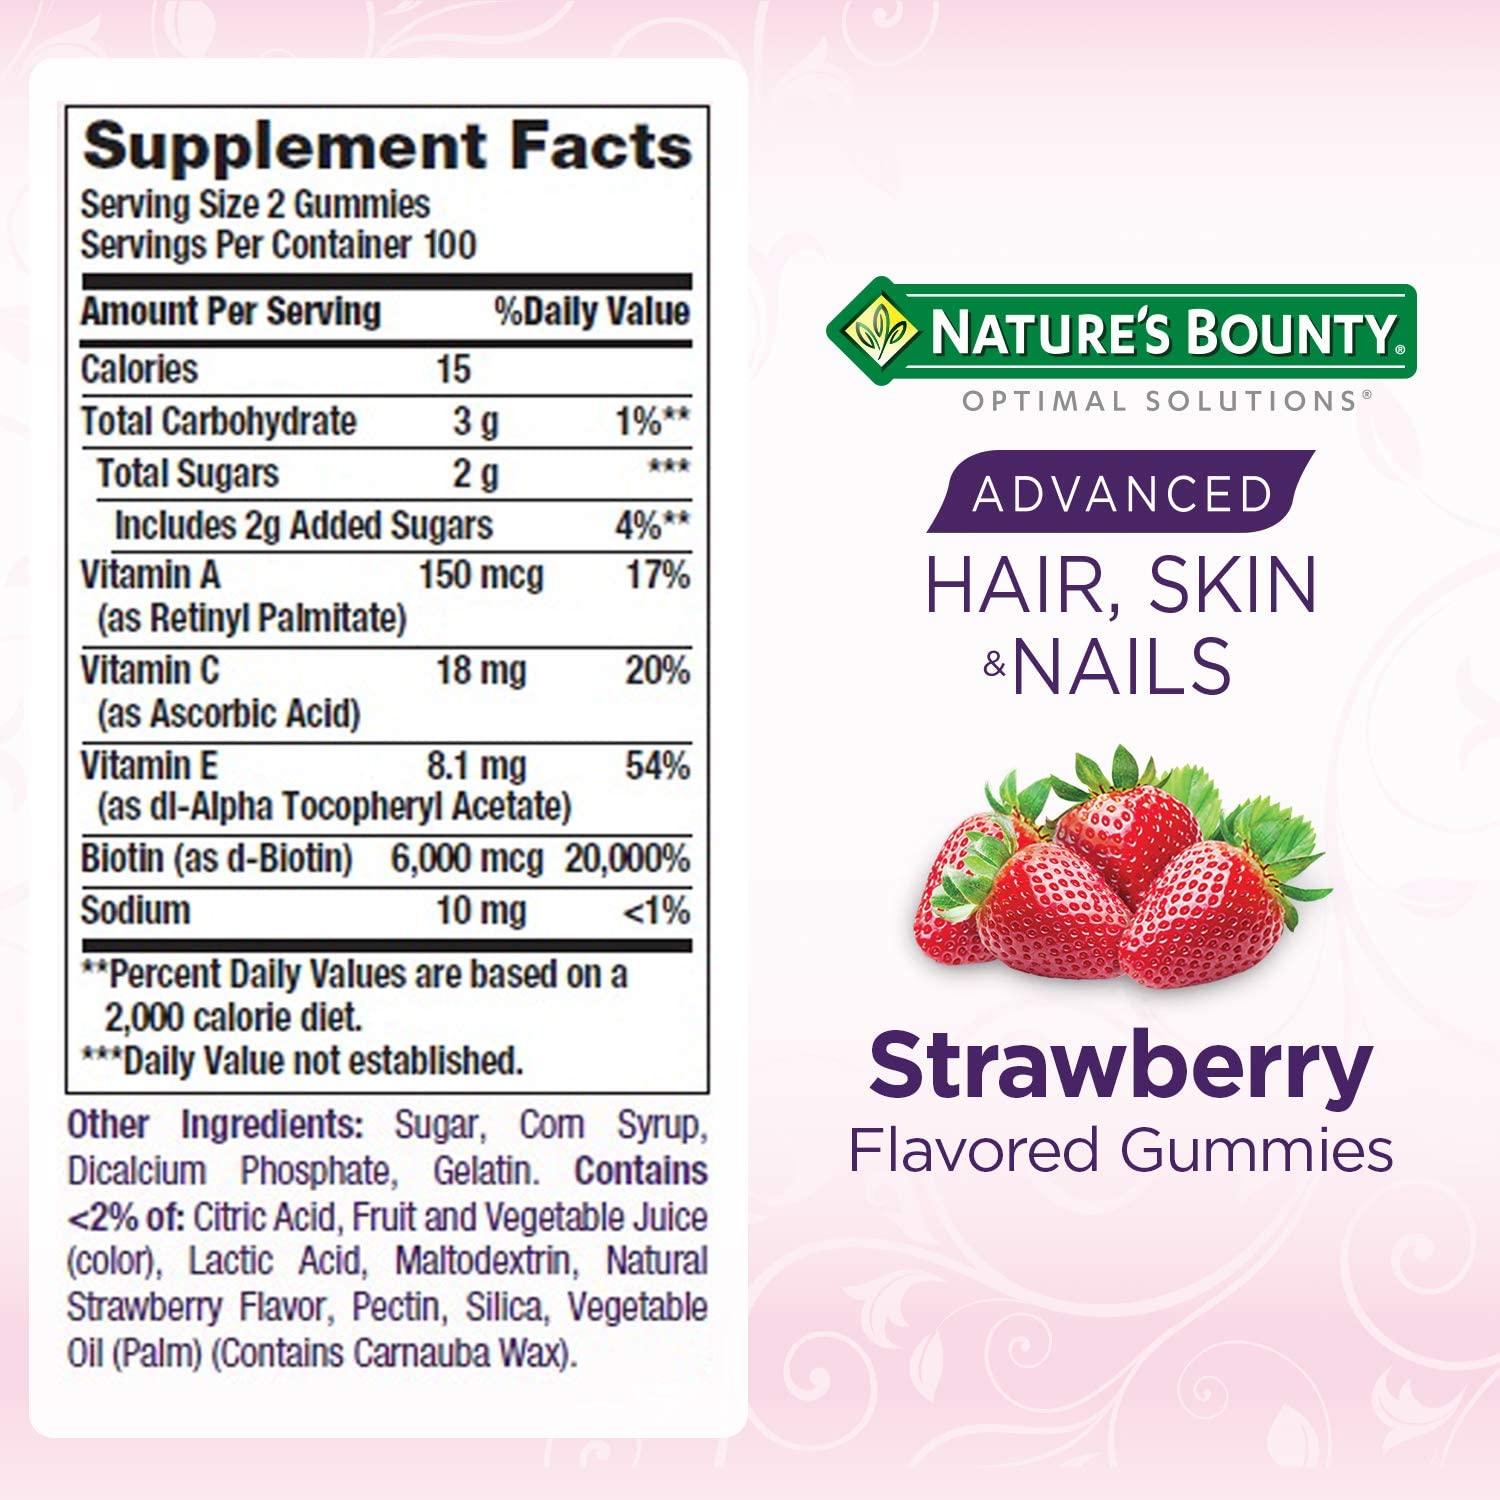 Amazon.com: Nature's Bounty Optimal Solutions Hair, Skin and Nails Gummies  - 220 Count : Health & Household